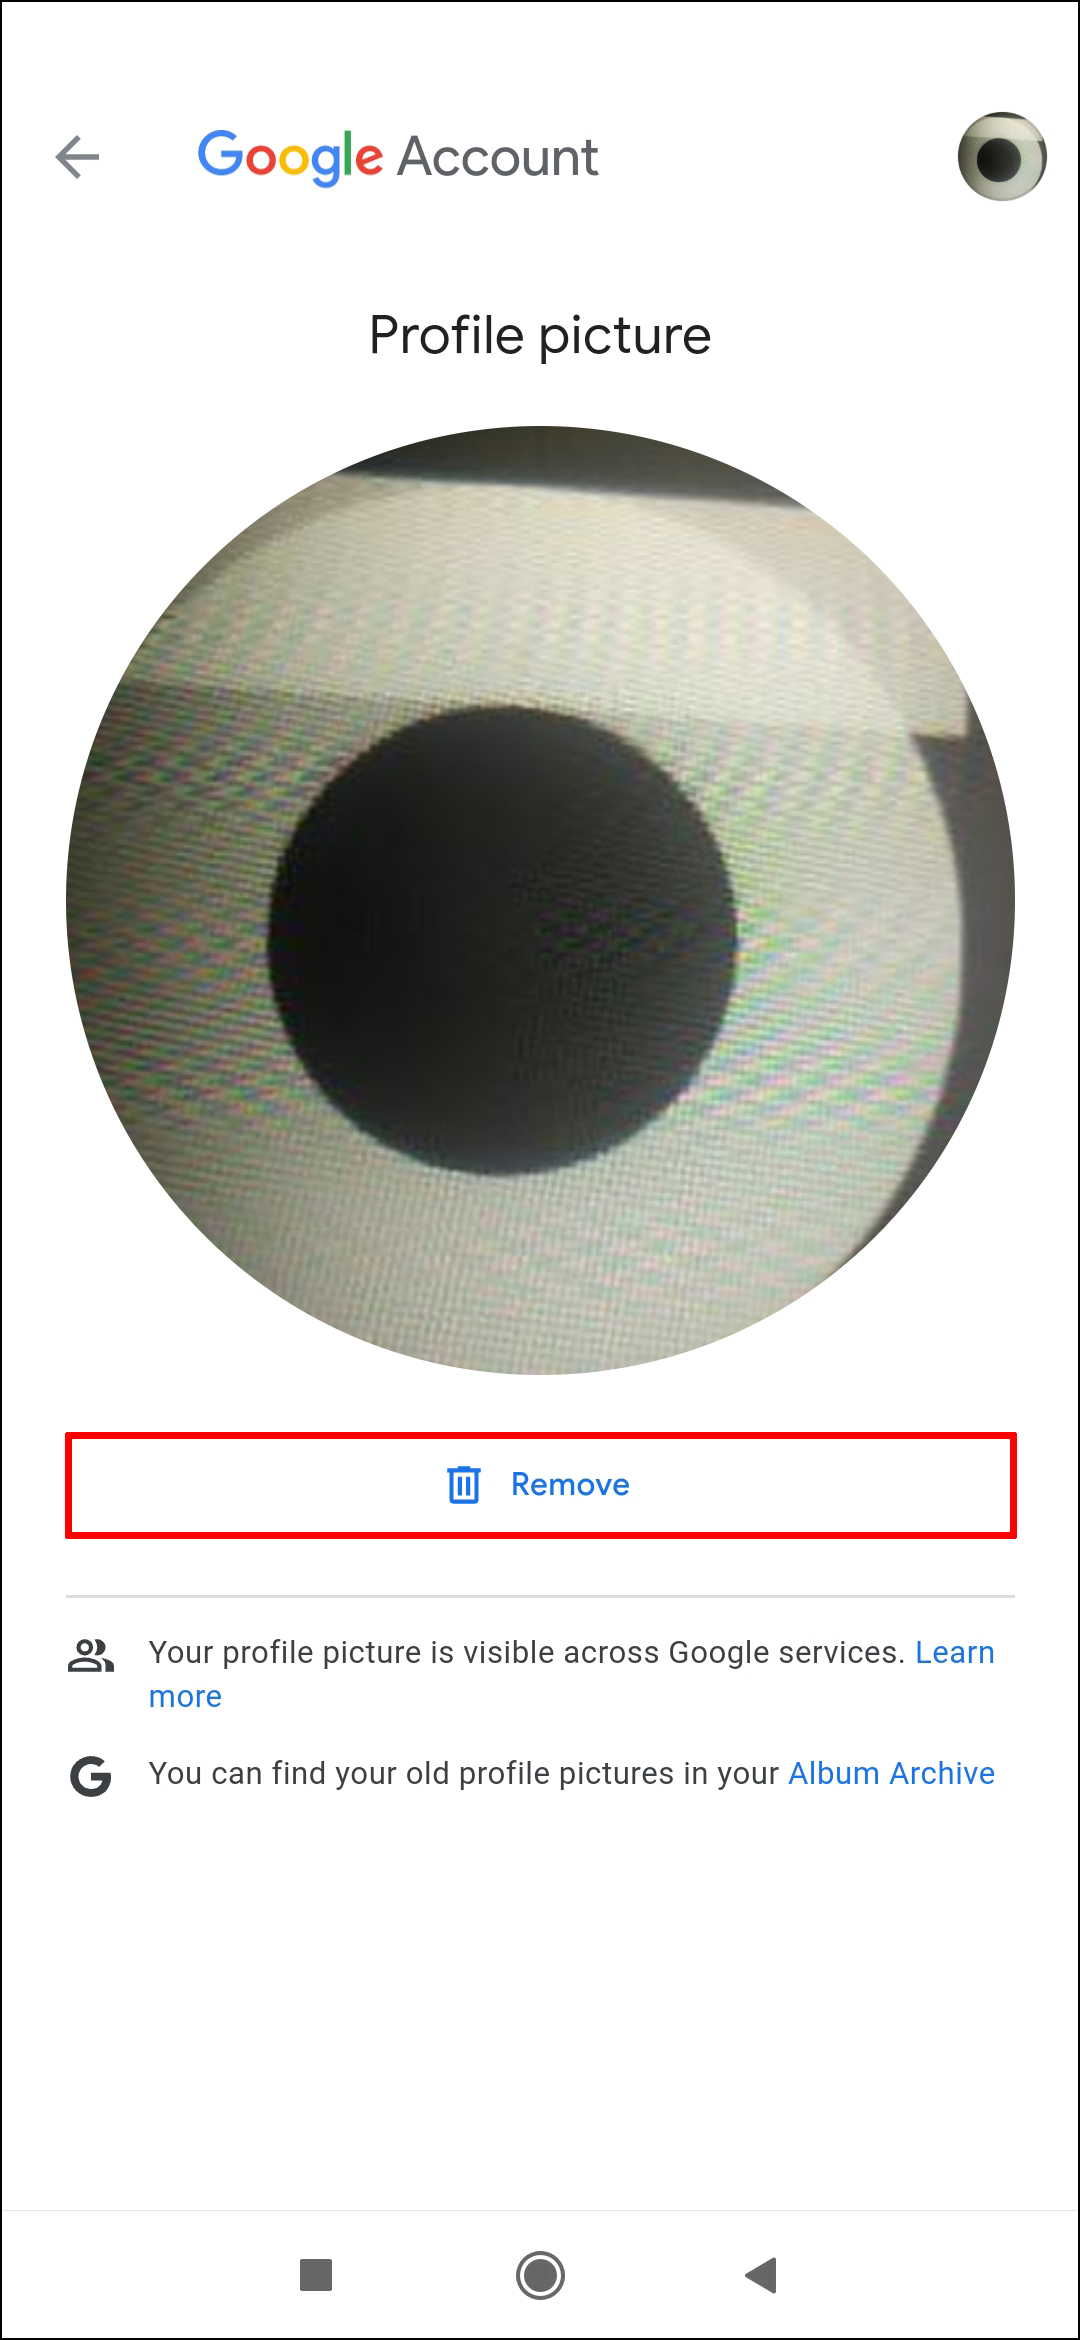 How to Remove a Profile Picture from Google